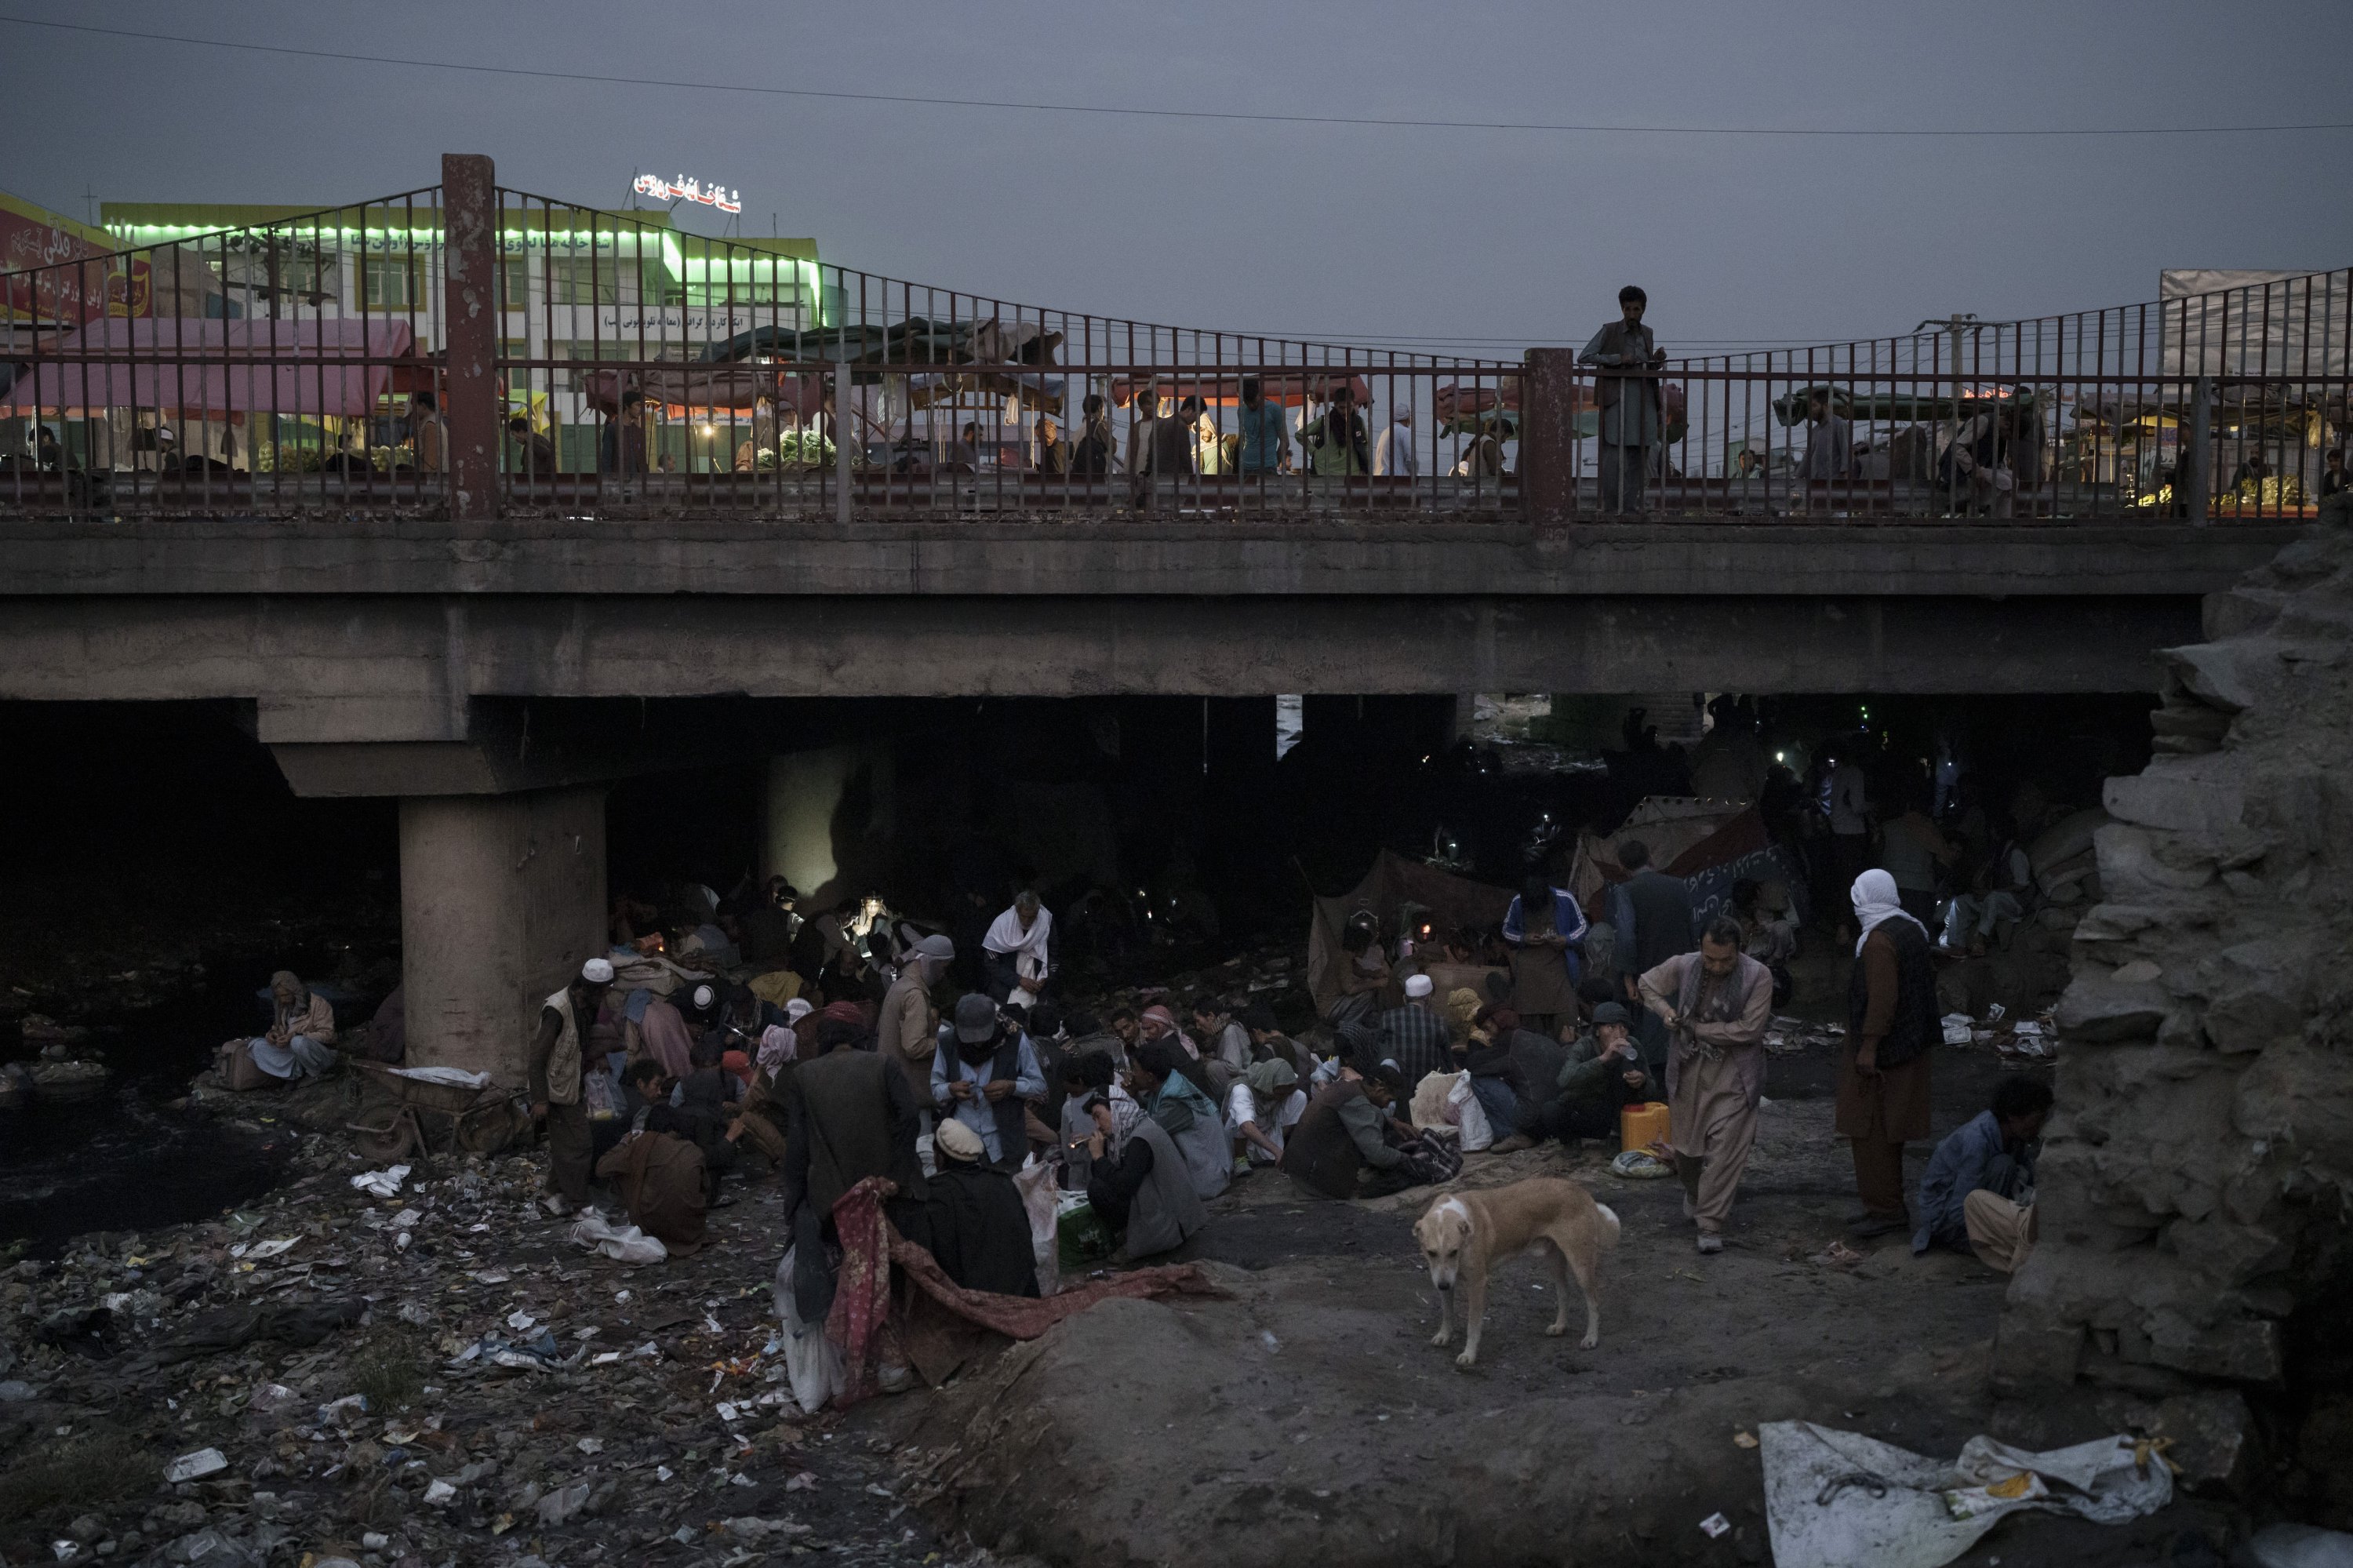 Afghans gather under a bridge to consume drugs, mostly heroin and methamphetamines, in Kabul, Afghanistan, Sept. 30, 2021. (AP Photo)